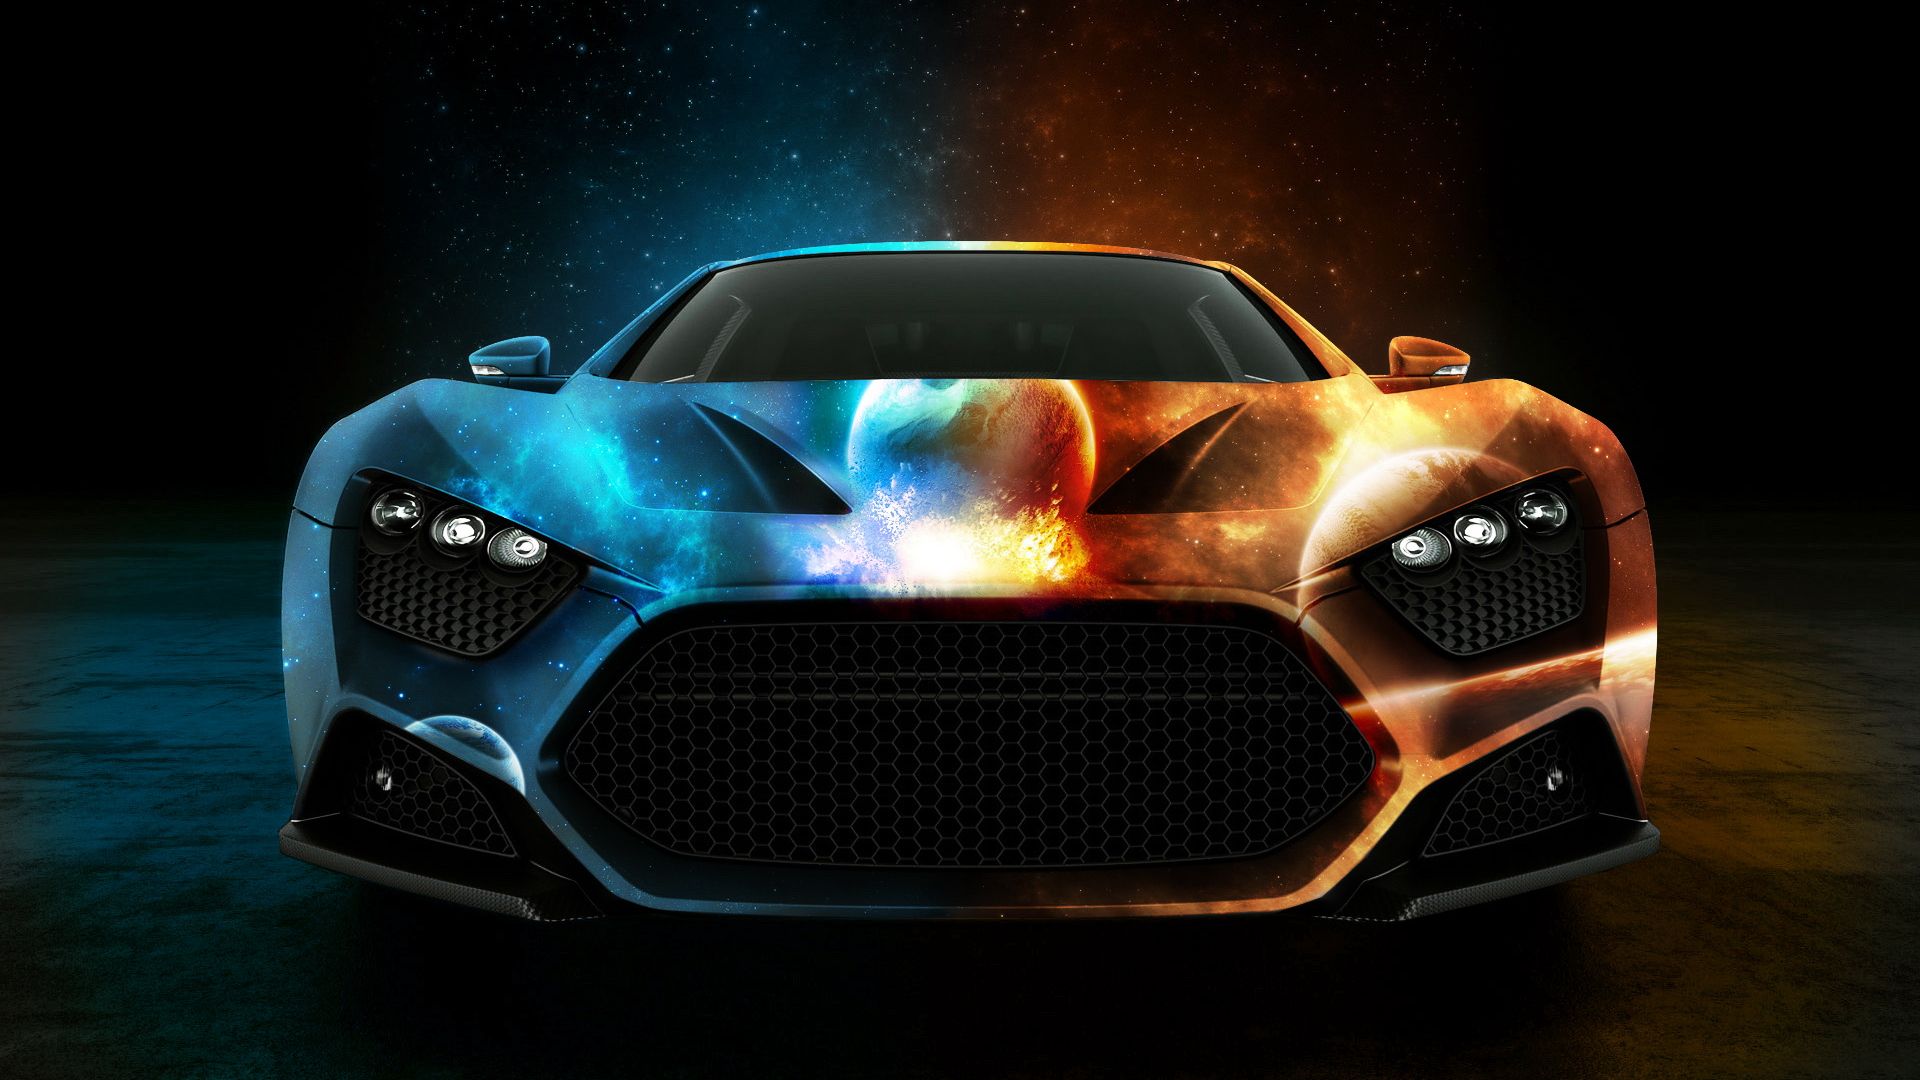 Free download Water and Fire Car Wallpaper iBackgroundWallpaper [1920x1200] for your Desktop, Mobile & Tablet. Explore Car Wallpaper for Fire. Cool Fire Wallpaper, Free Fire Wallpaper, Fire Background Wallpaper